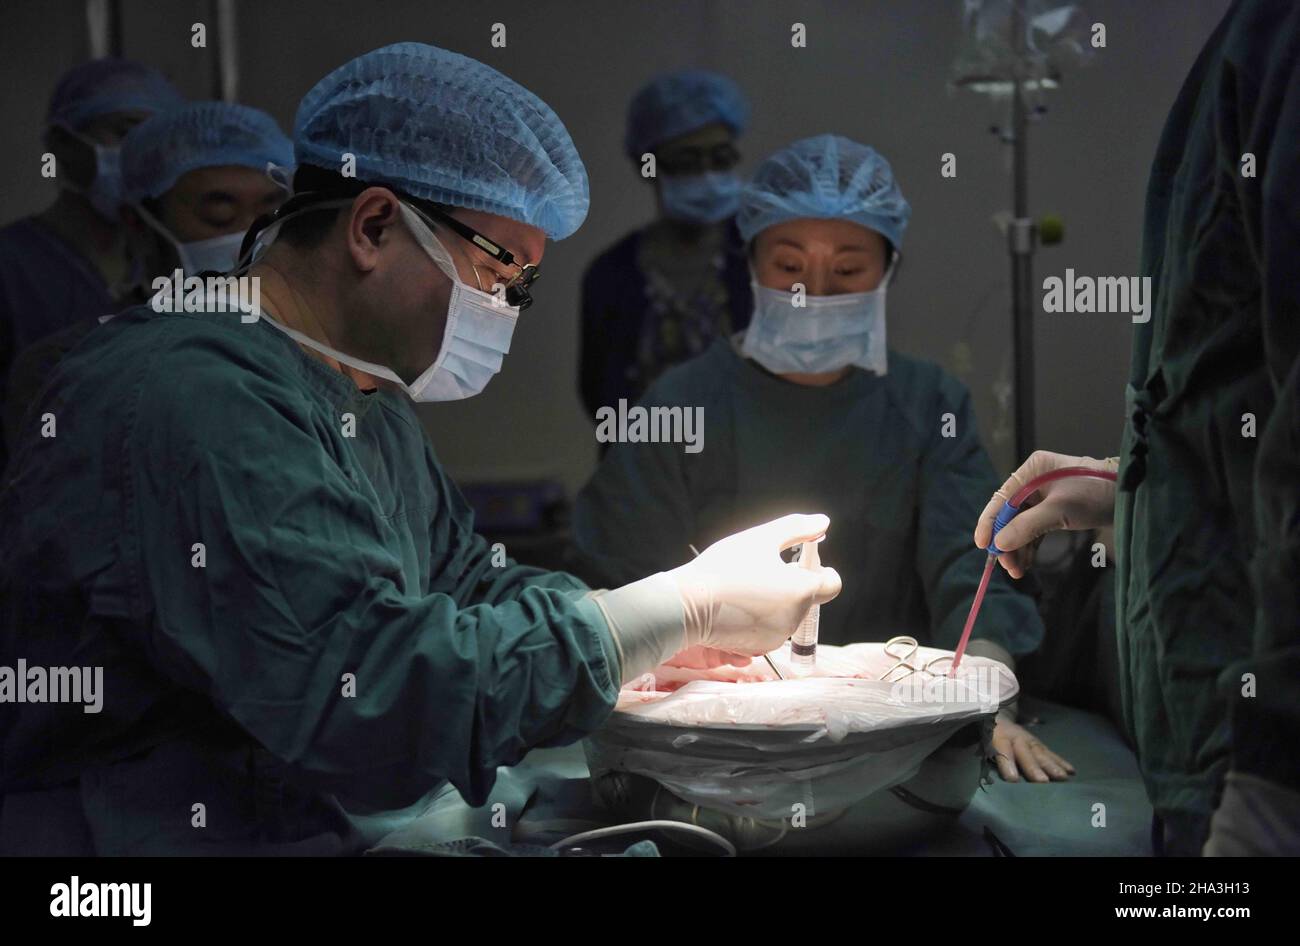 (211210) -- CHENGDU, Dec. 10, 2021 (Xinhua) -- Wang Wentao (L) uses the technology of extracorporeal hepatectomy plus liver autotransplantation in the treatment of a hydatid disease patient at a hospital in Tibetan Autonomous Prefecture of Garze, southwest China's Sichuan Province, Jan. 16, 2020.  Wang Wentao, deputy director of the liver surgery department at West China Hospital of Sichuan University, started his work on the prevention and control of hydatid disease in Tibetan Autonomous Prefecture of Garze in 2006 when he learned that some local people suffer from hydatid disease during one Stock Photo